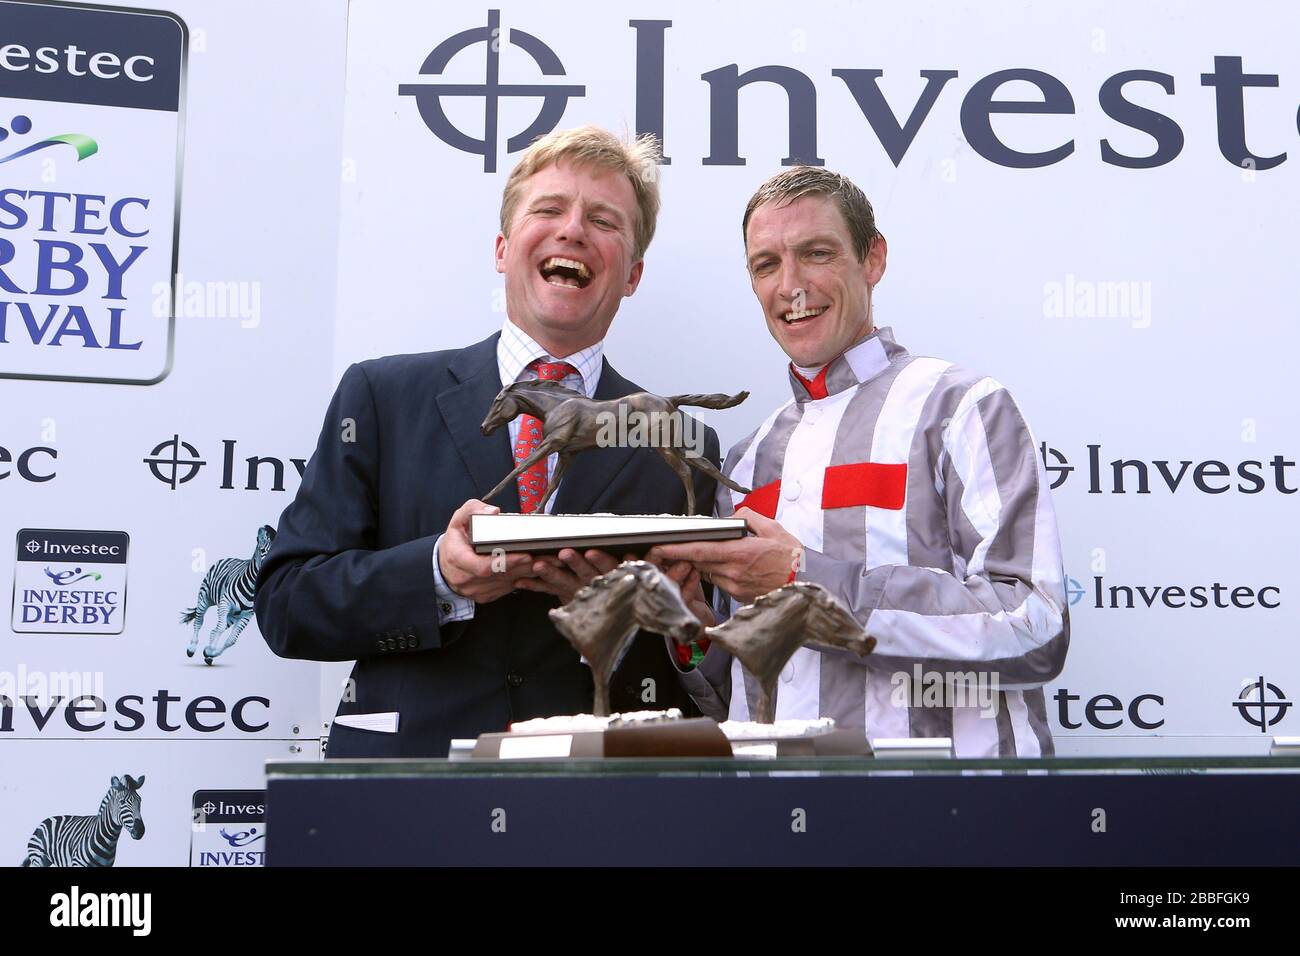 Jockey Richard Hughes (right) and trainer Ralph Beckett (left) celebrate with the trophy after winning The Investec Oaks with Talent Stock Photo